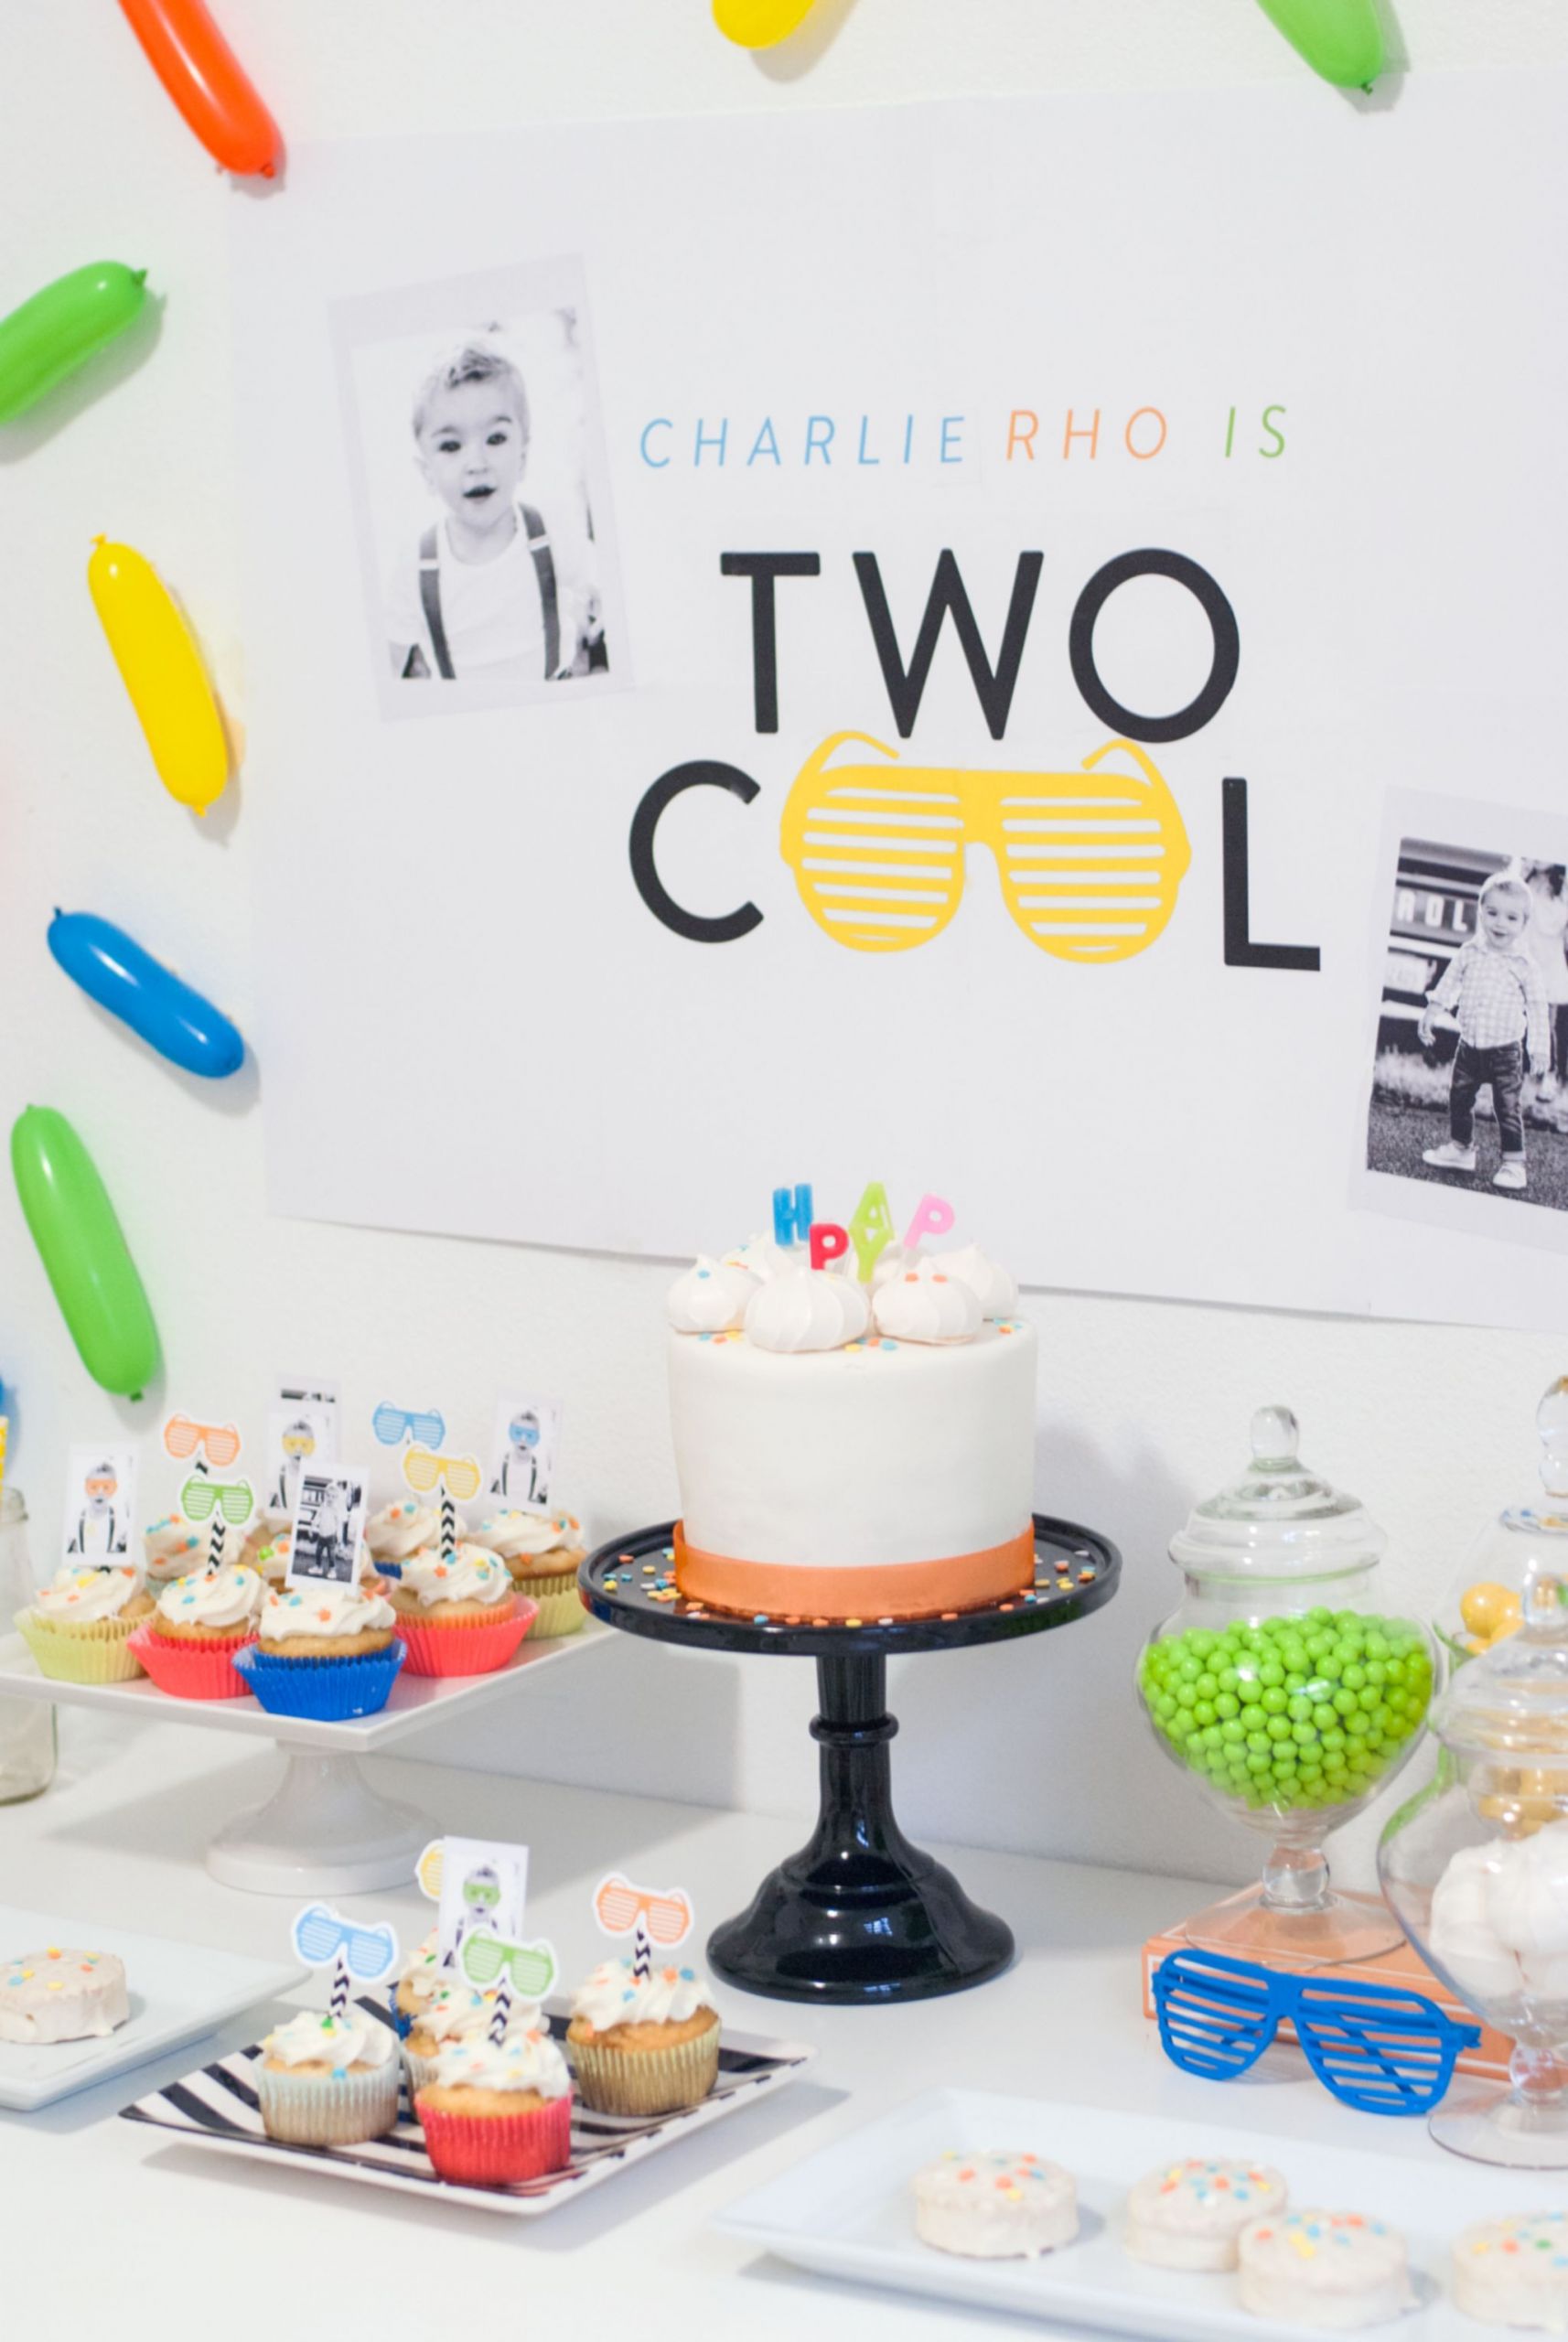 2 Year Old Boy Birthday Party Ideas Summer
 A Two Cool Birthday Party That ll Have You Reaching for